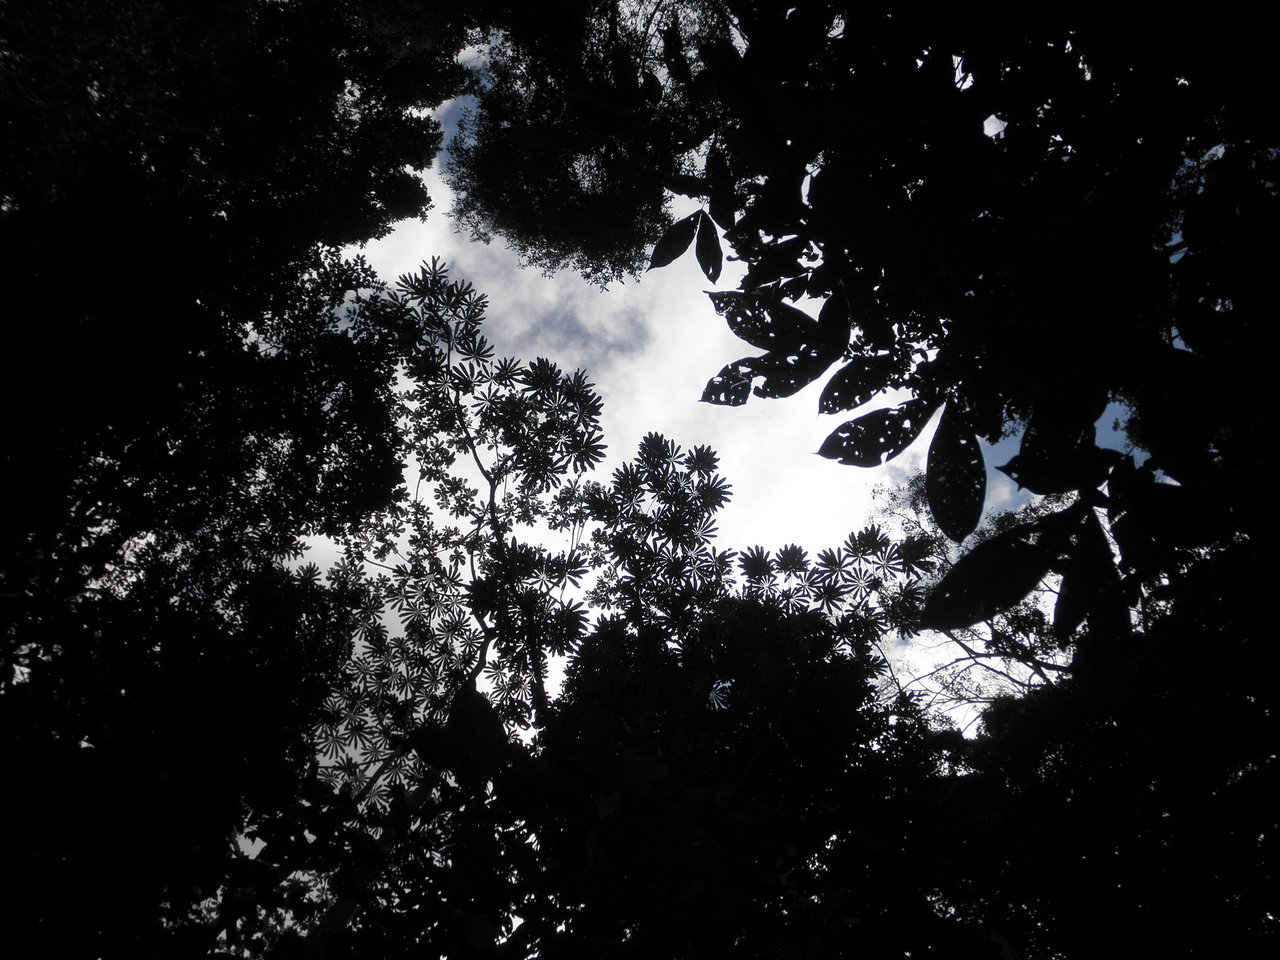 Trees are seen in silhouette from below.